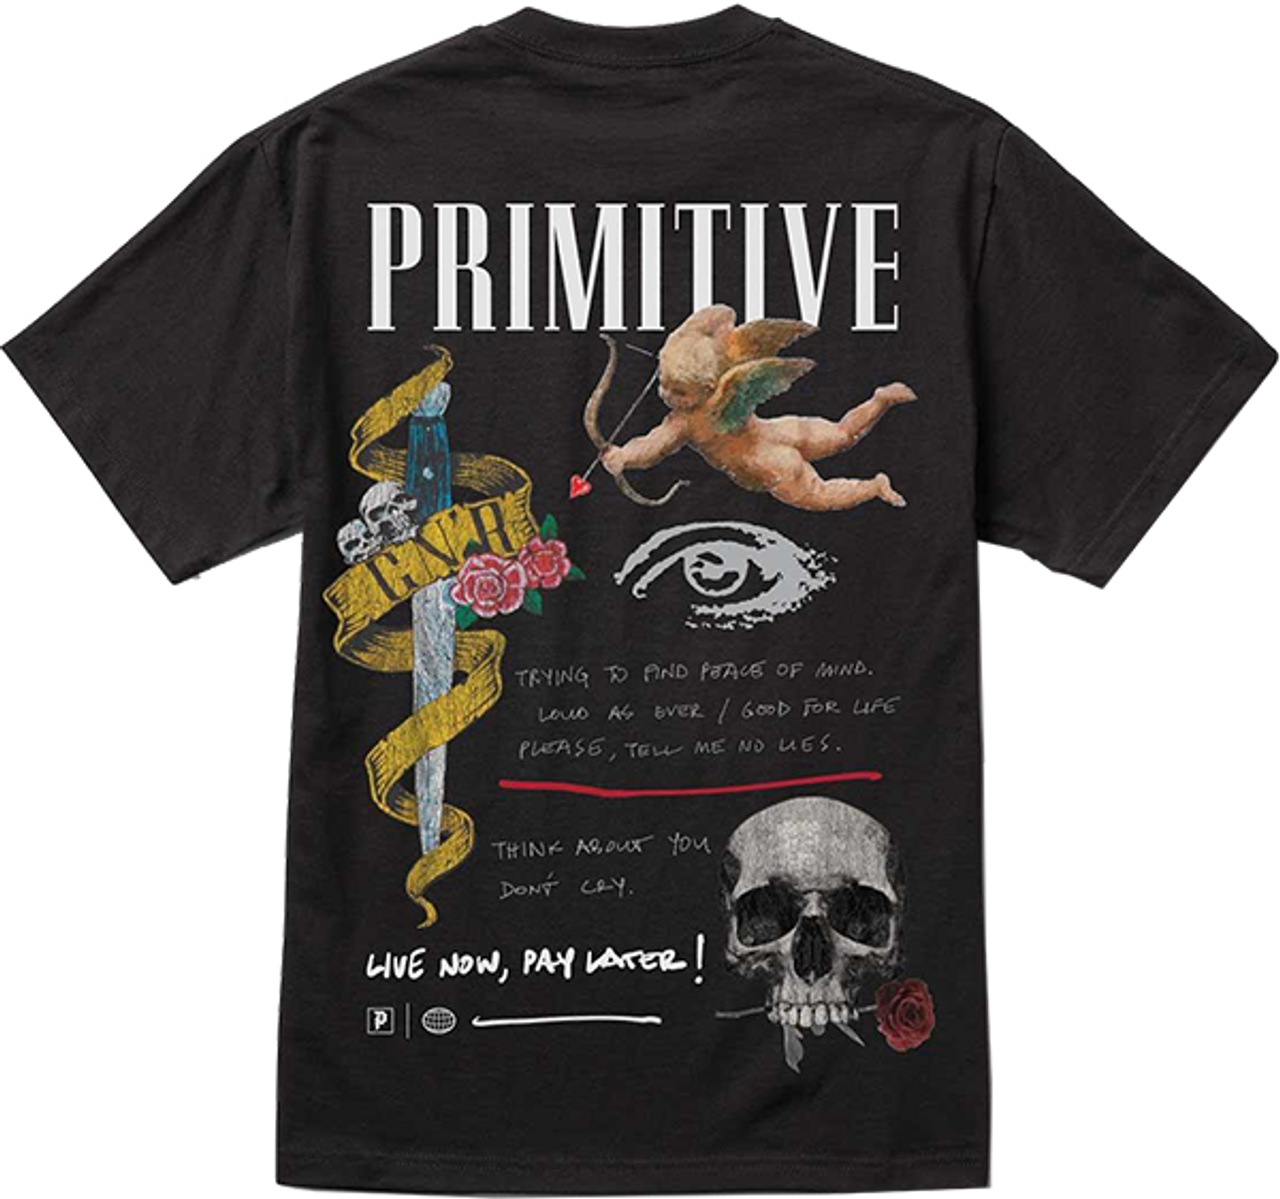 PRIMITIVE GN'R DON'T CRY SS TSHIRT SMALL BLK